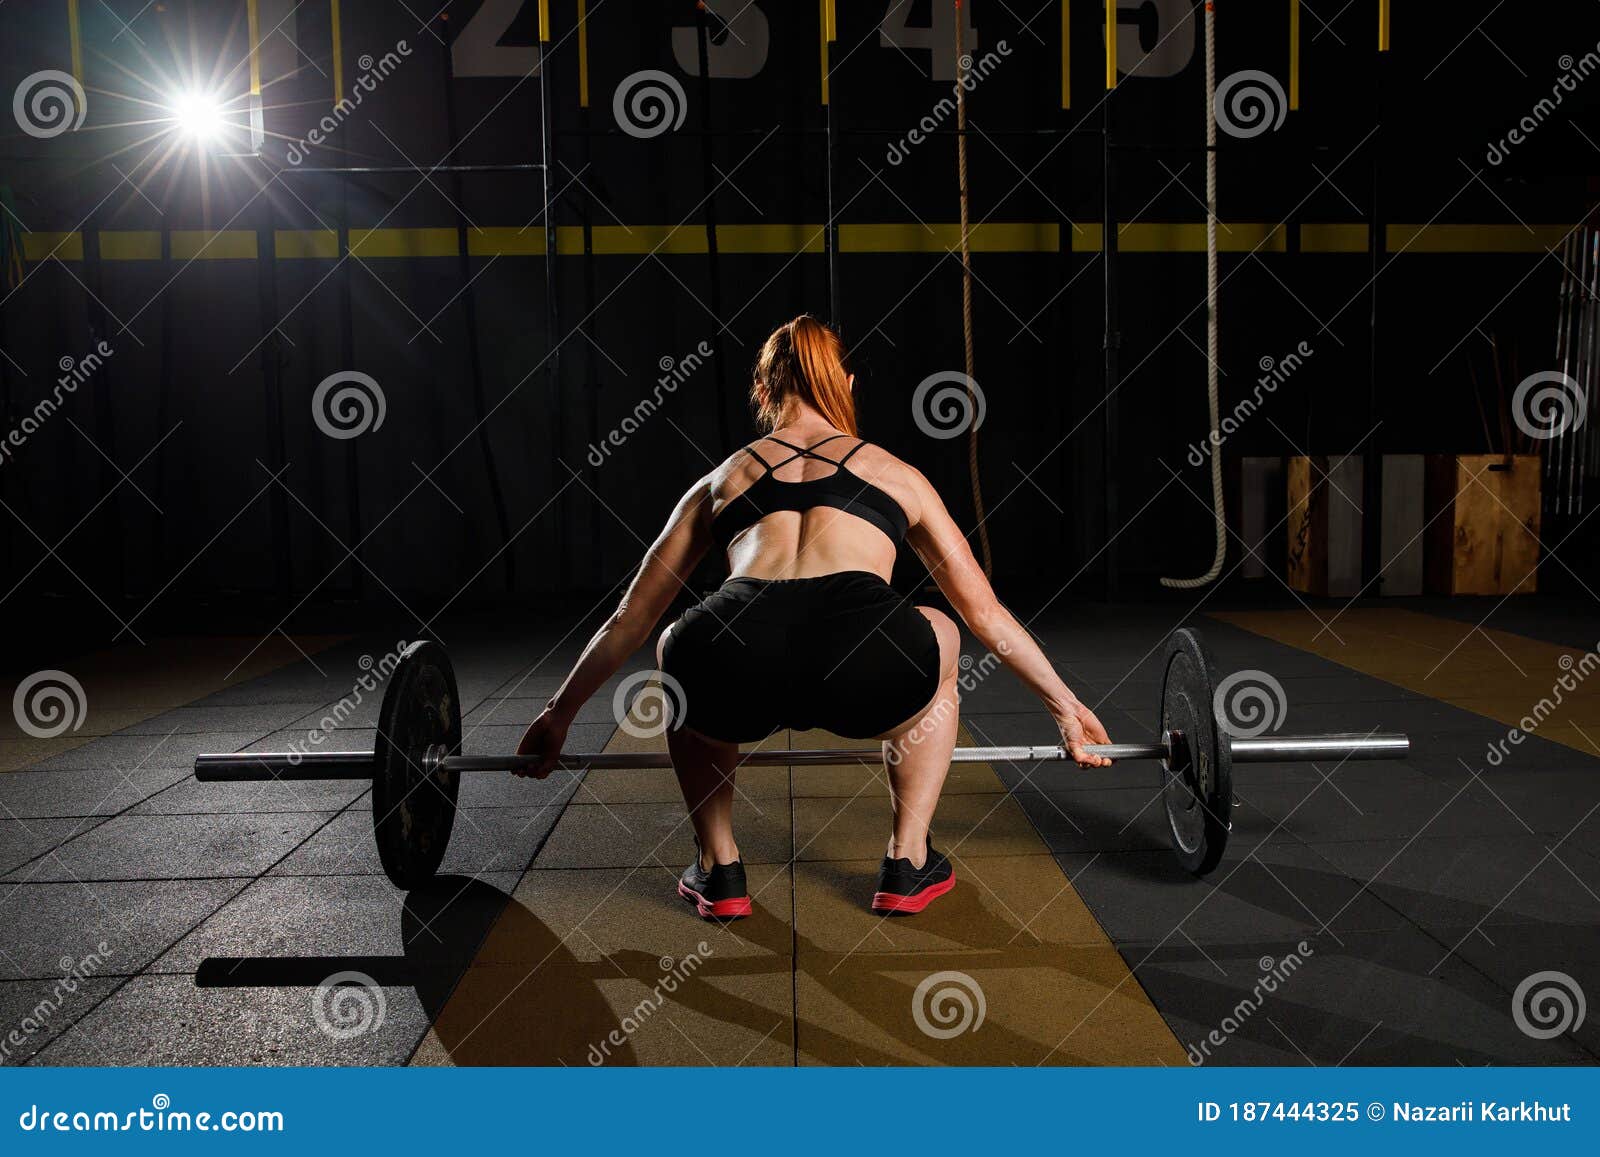 Woman with Barbell Caucasian Female Performing Deadlift Exercise with ...